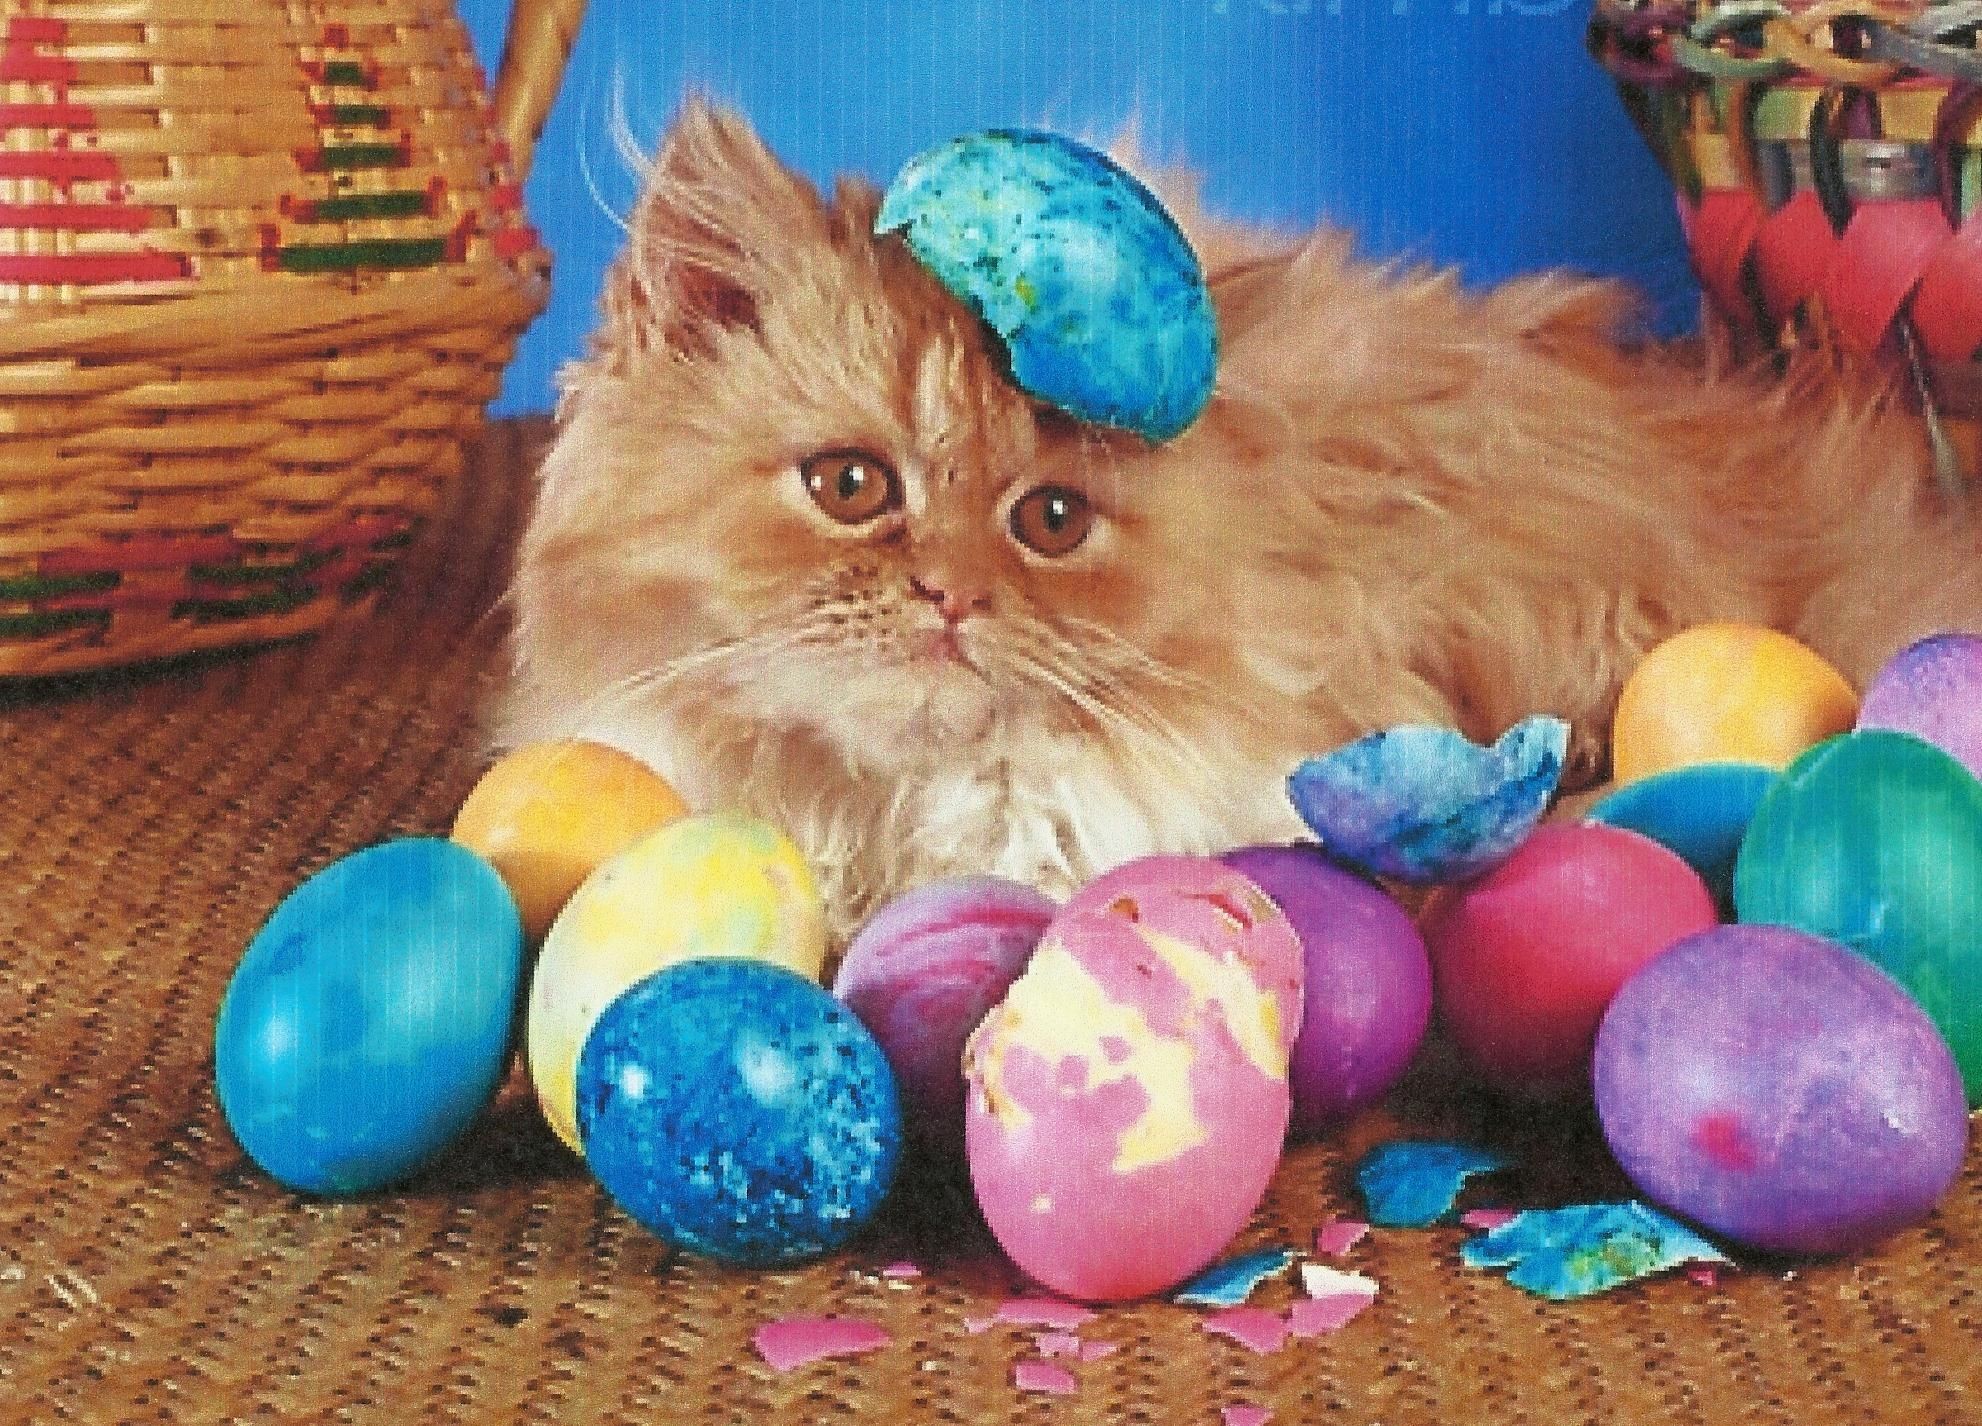 1982x1426 HD A Easter Kitten With Color Eggs Wallpaper, easter, eggs, feline, color,  kitten, cute,Animals, funny